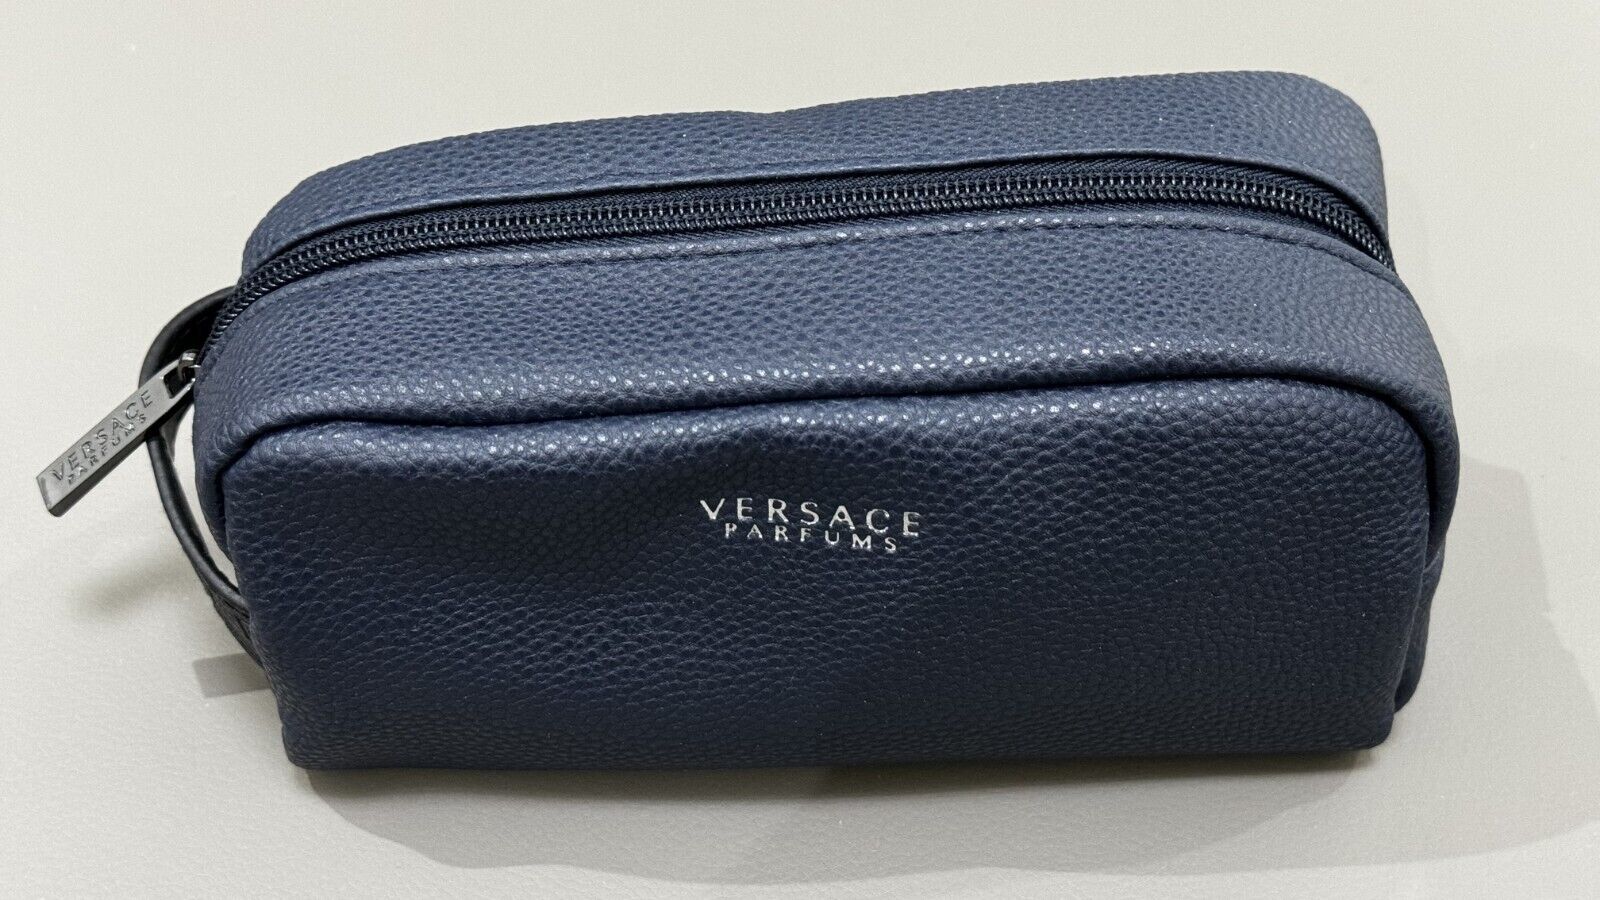 VERSACE for Turkish Airlines Business Class Travel Amenity Kit Brand New Sealed